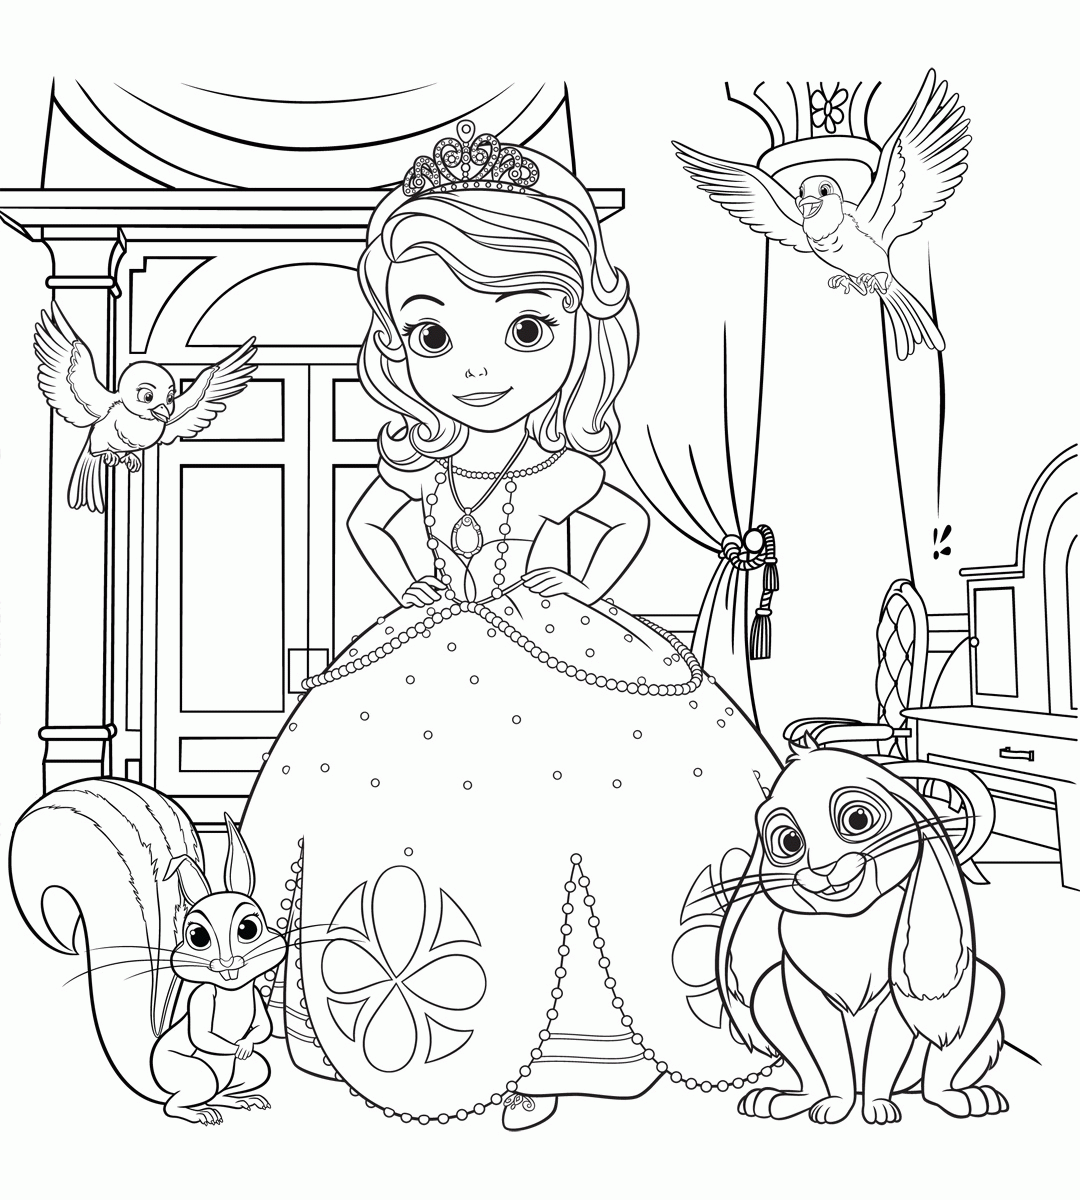 Sofia The First Coloring Pages For Girls To Print For Free ...